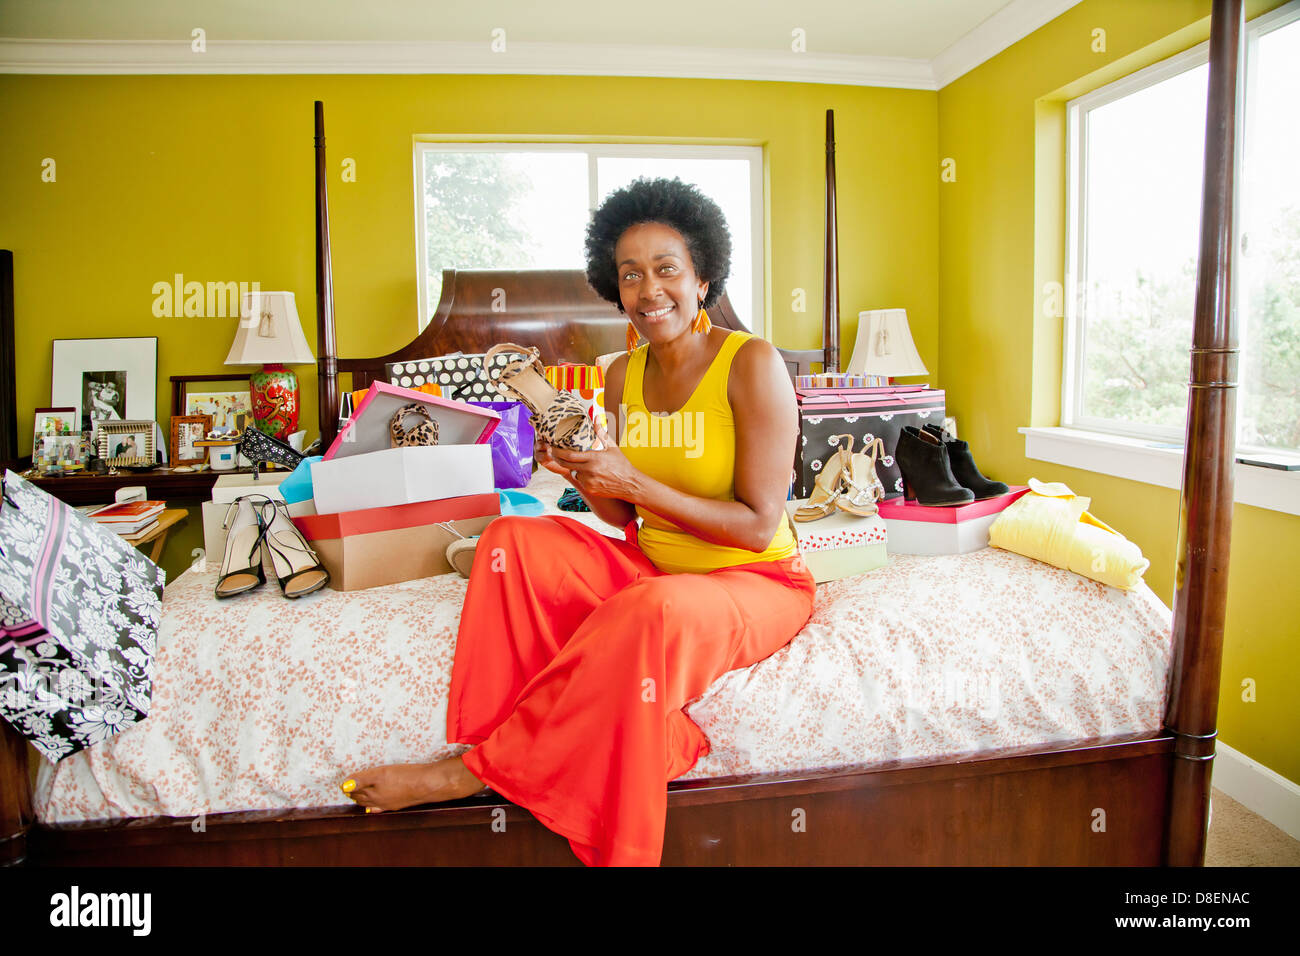 Woman on bed with shopping bags and shoes Stock Photo